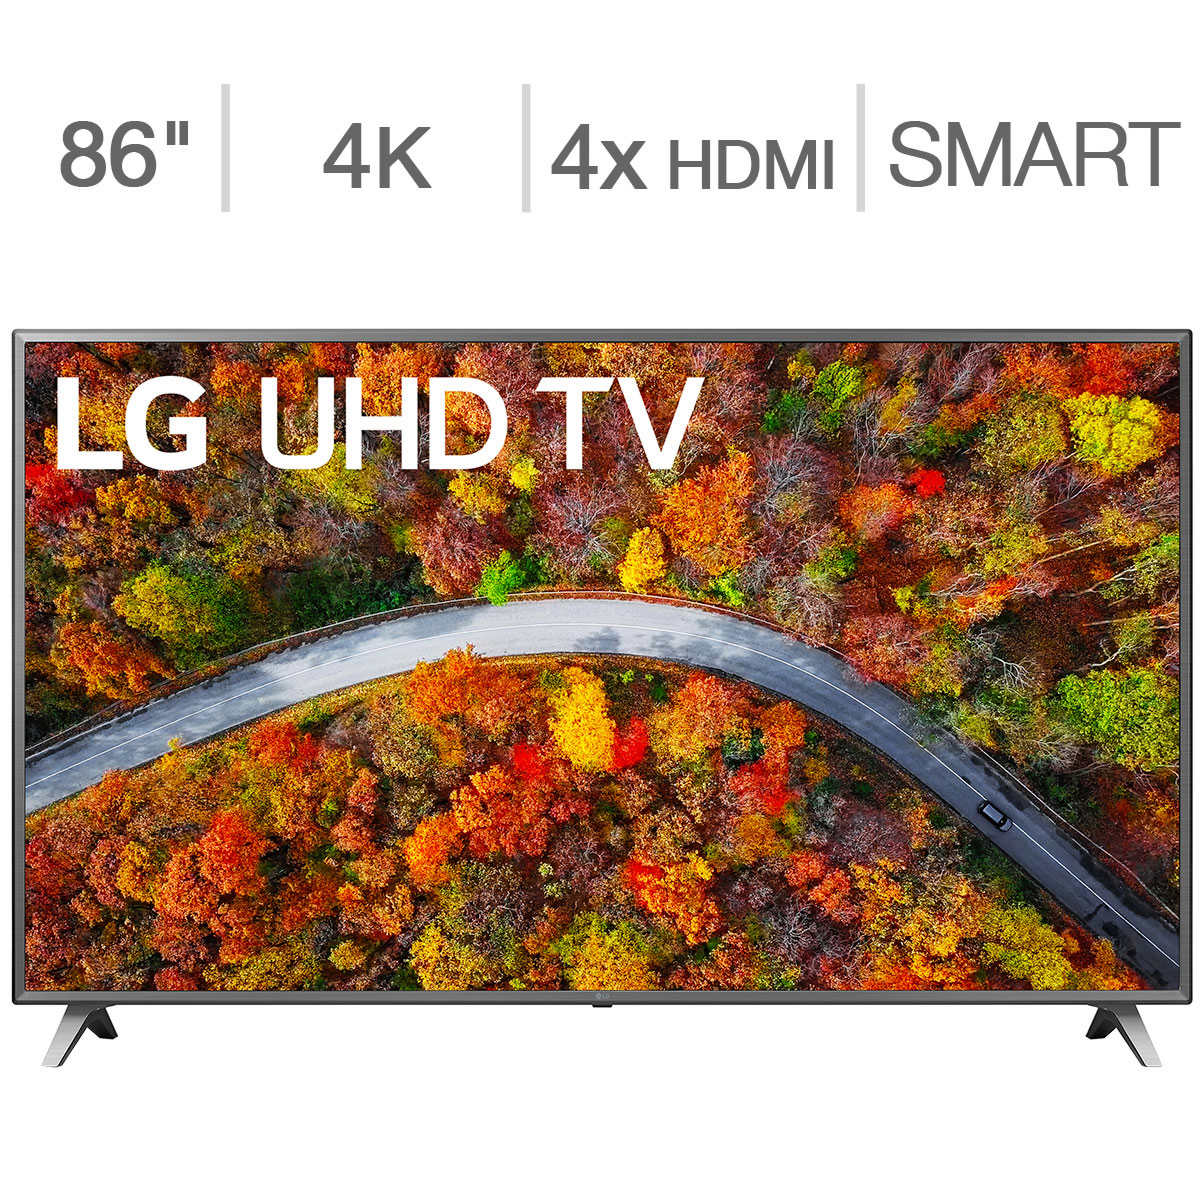 86" LG TV at Costco (in store) $799.97 YMMV $799.97